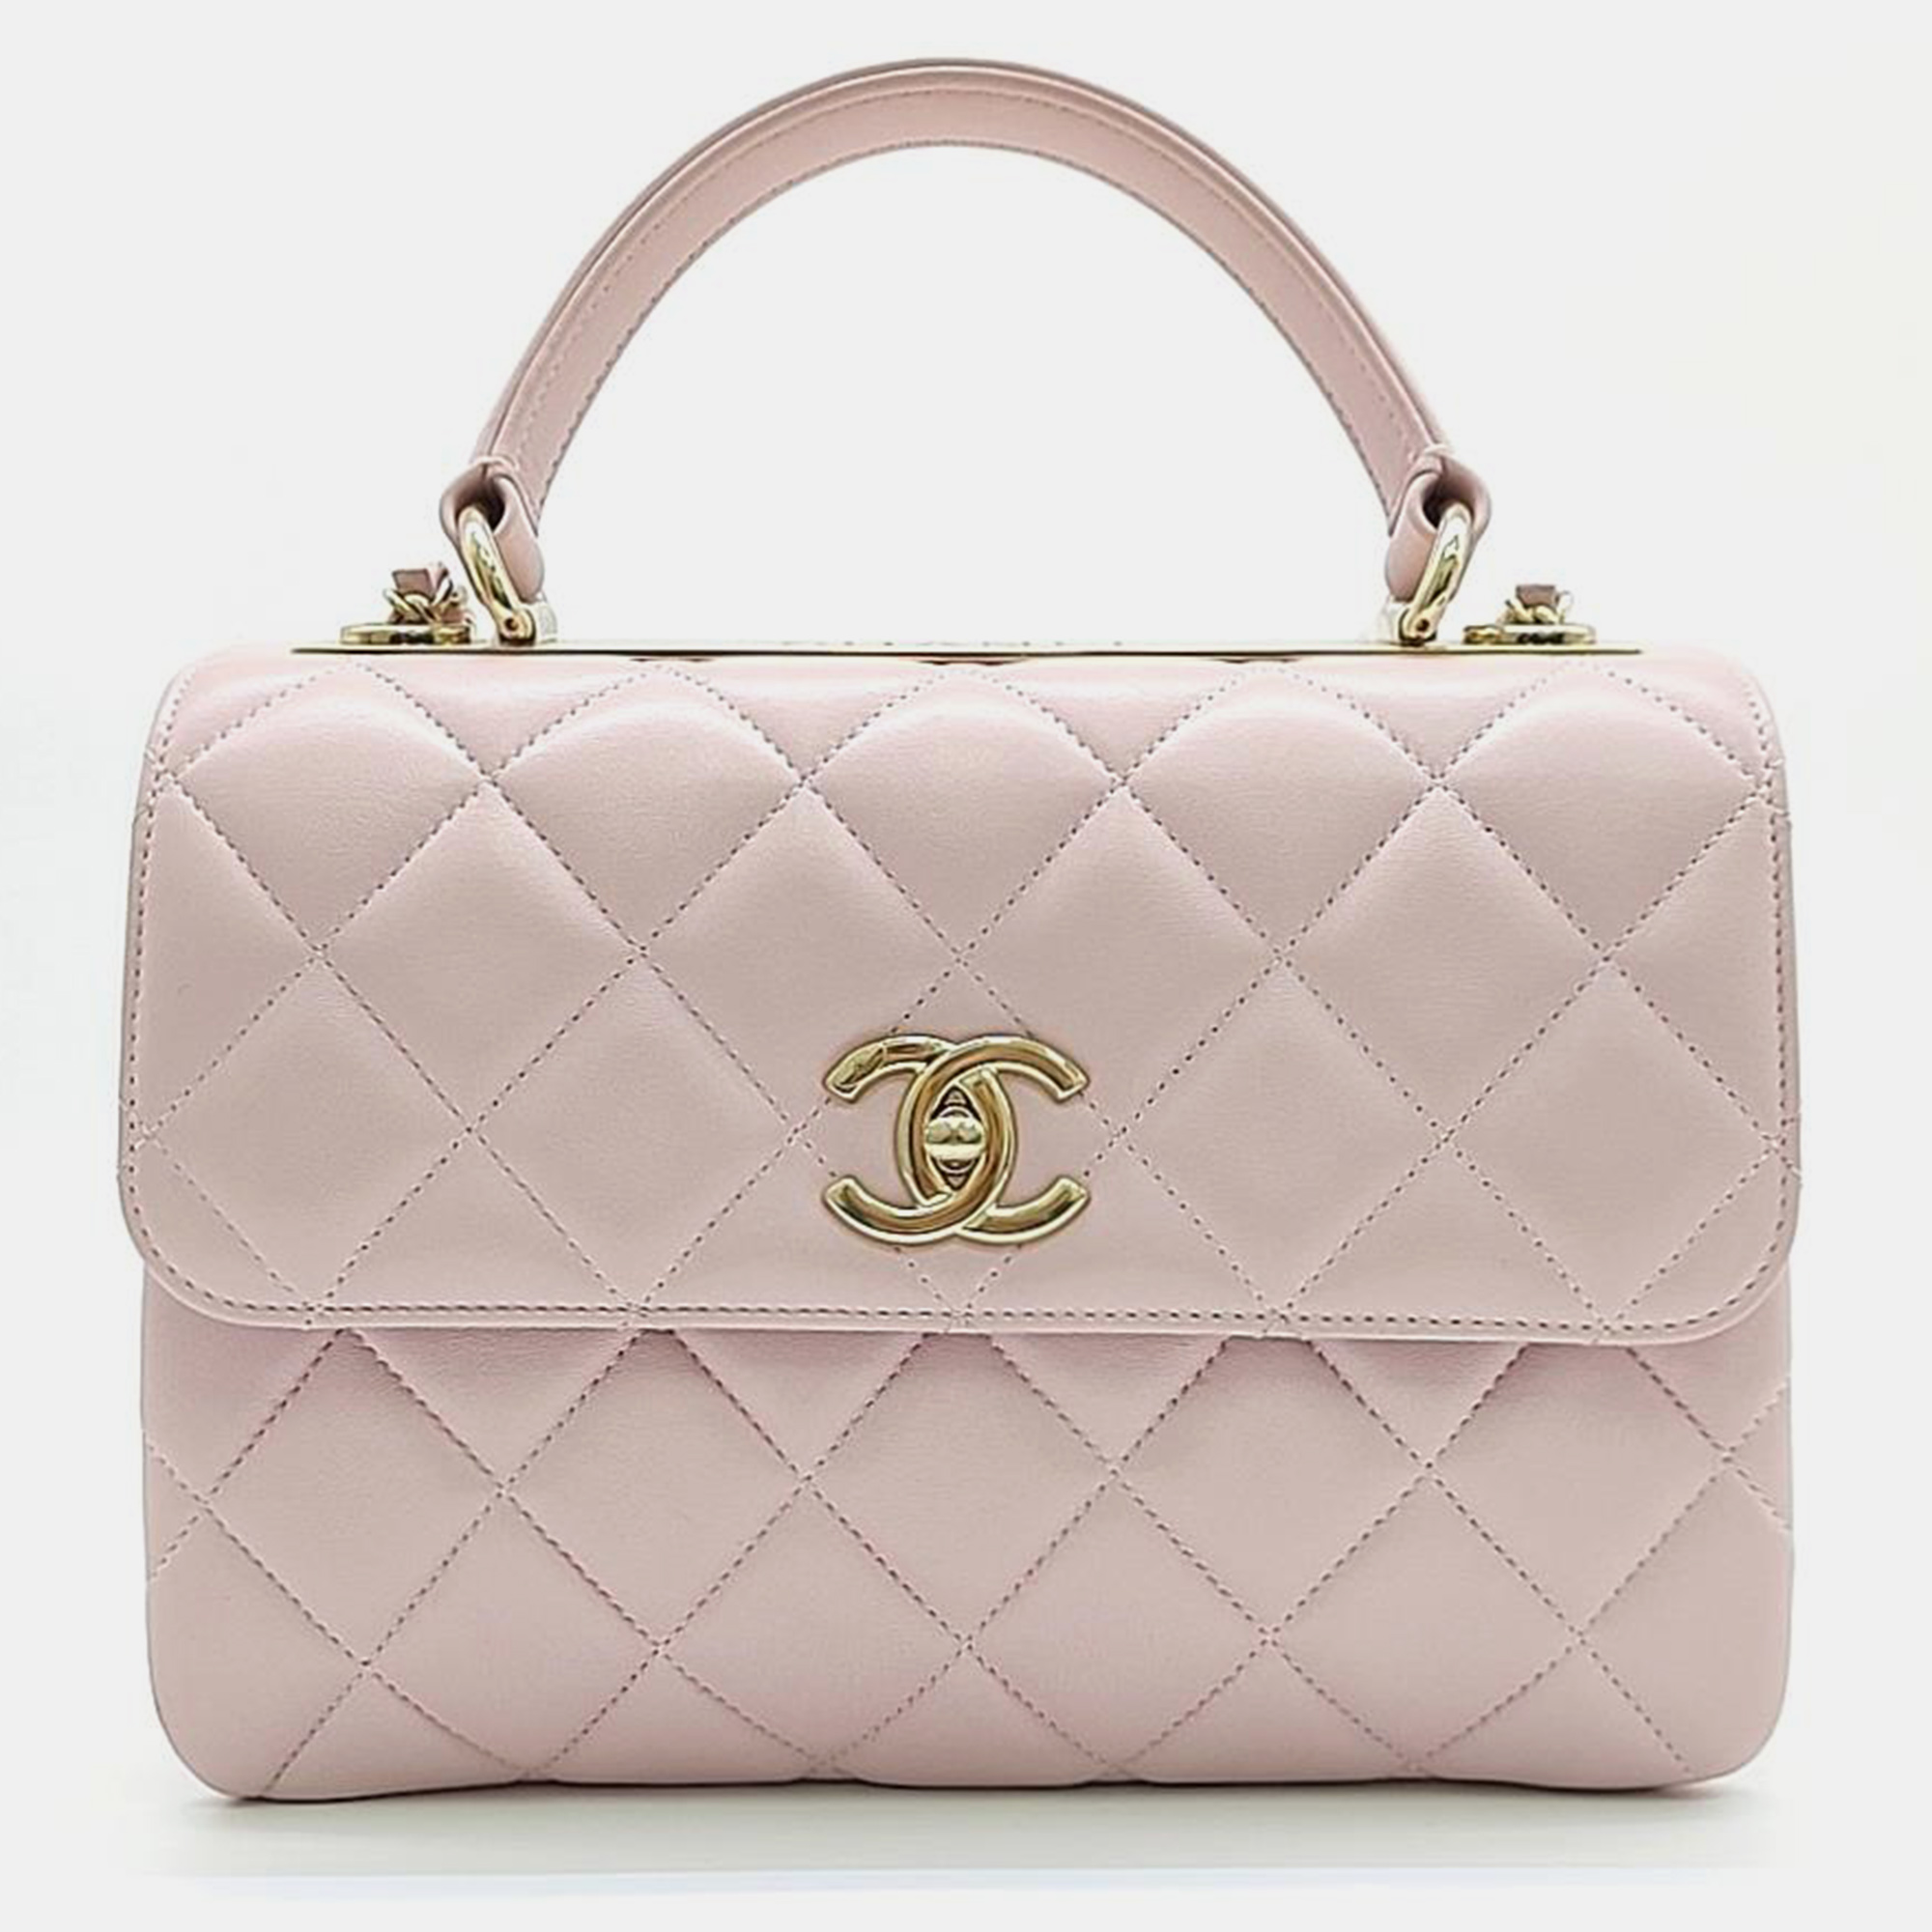 Chanel baby pink leather small trendy cc flap bag